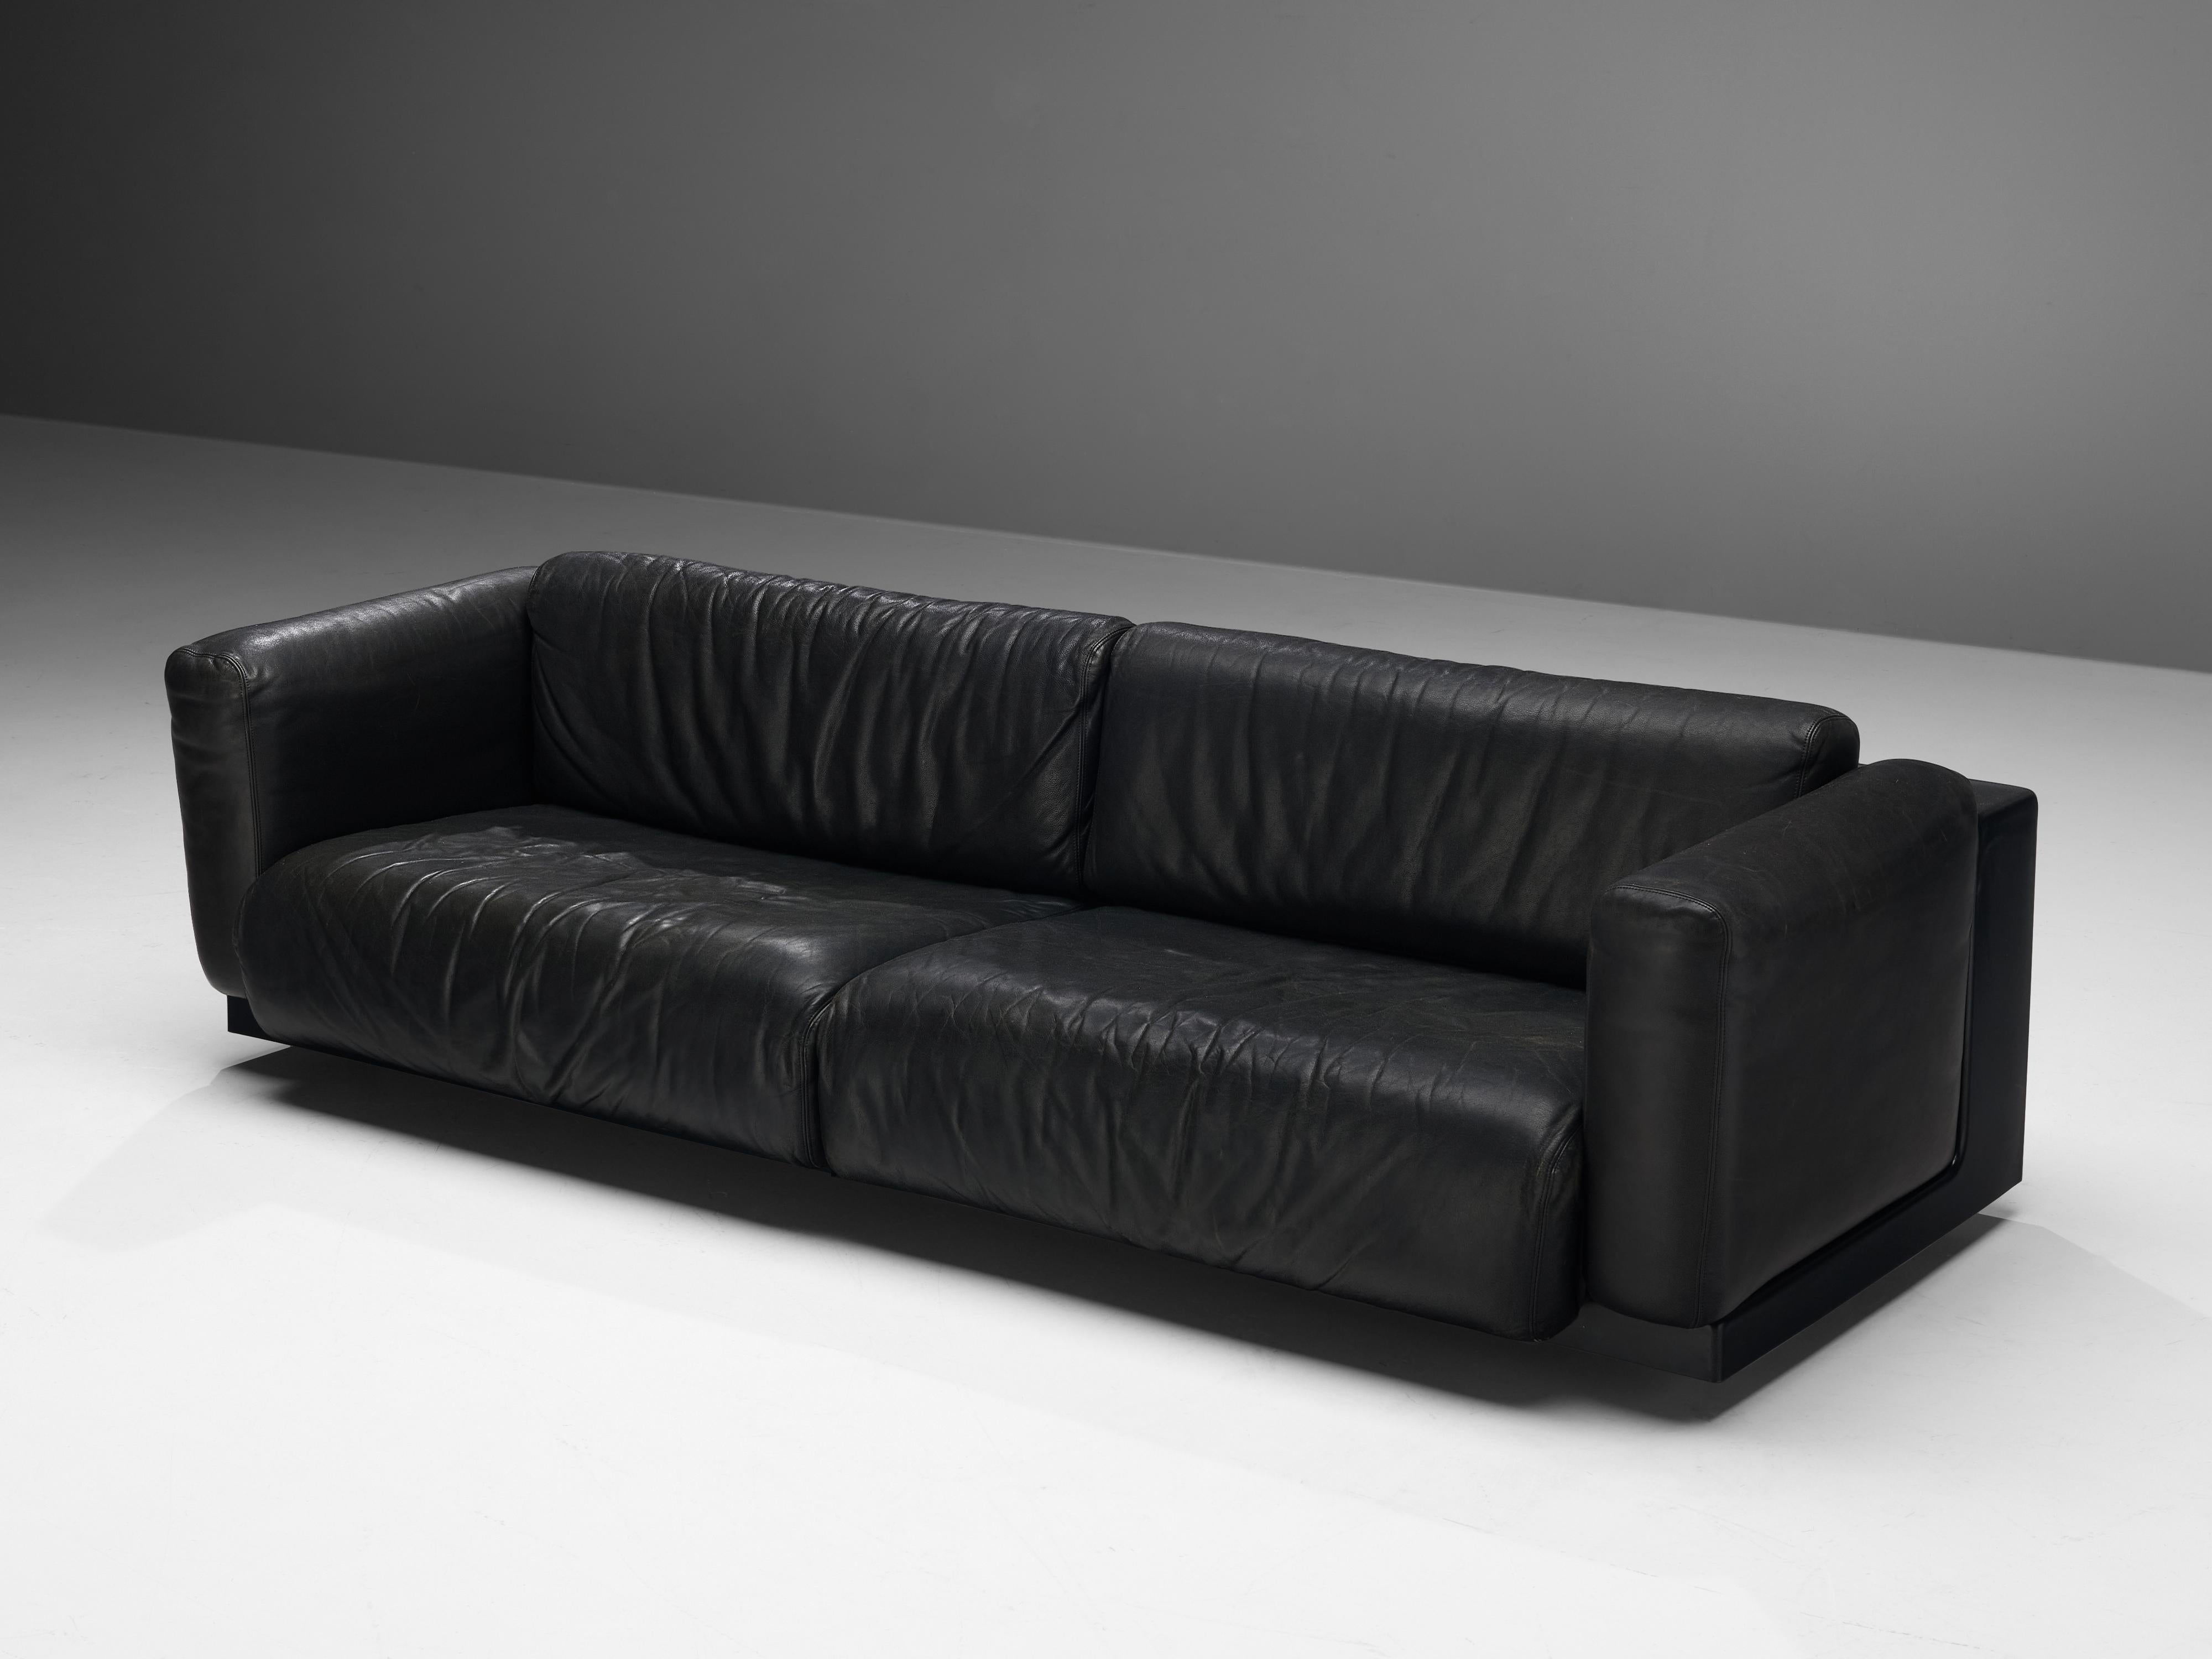 Cini Boeri for Knoll, sofa, 'Gradual', black leather, fiberglass, Italy, 1971.

This stunning black sofa was designed by Cini Boeri for Knoll. The frame of this sofa is made out of black fiberglass. The seats and cushions are upholstered in black